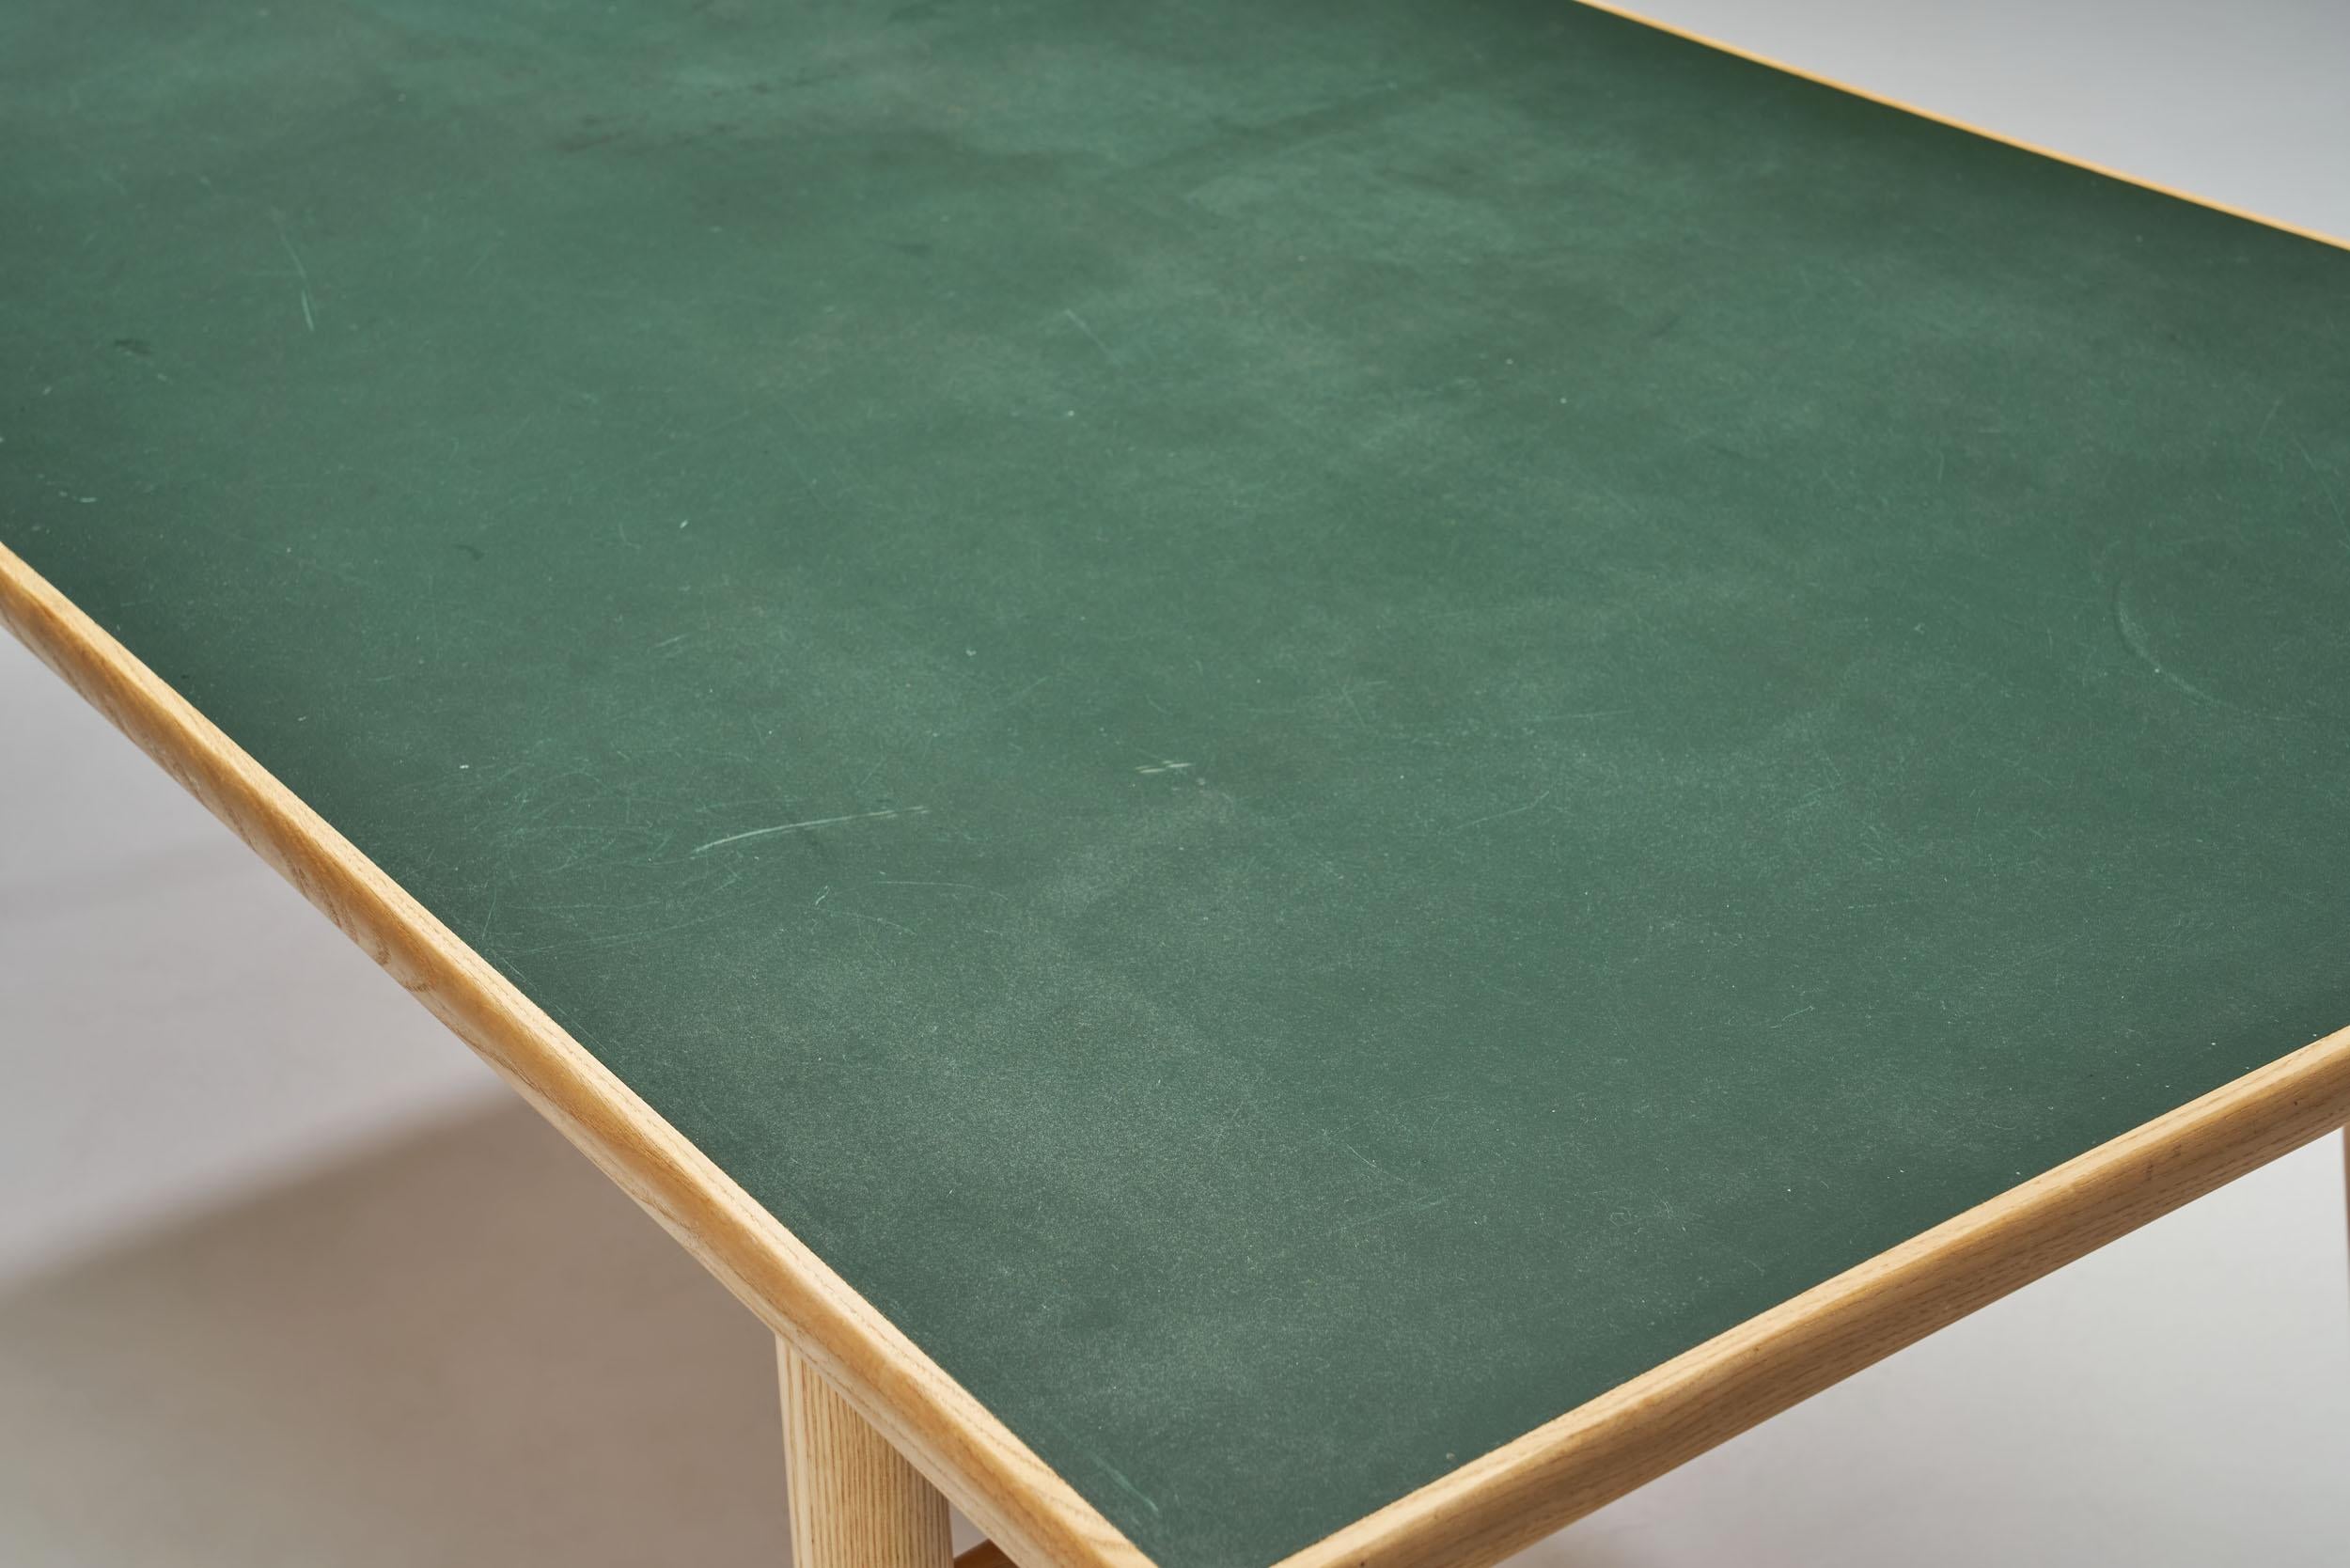 Mid-20th Century Poul M. Volther “C35 FDB” Dining Table for FDB Møbler, Denmark 1950s For Sale